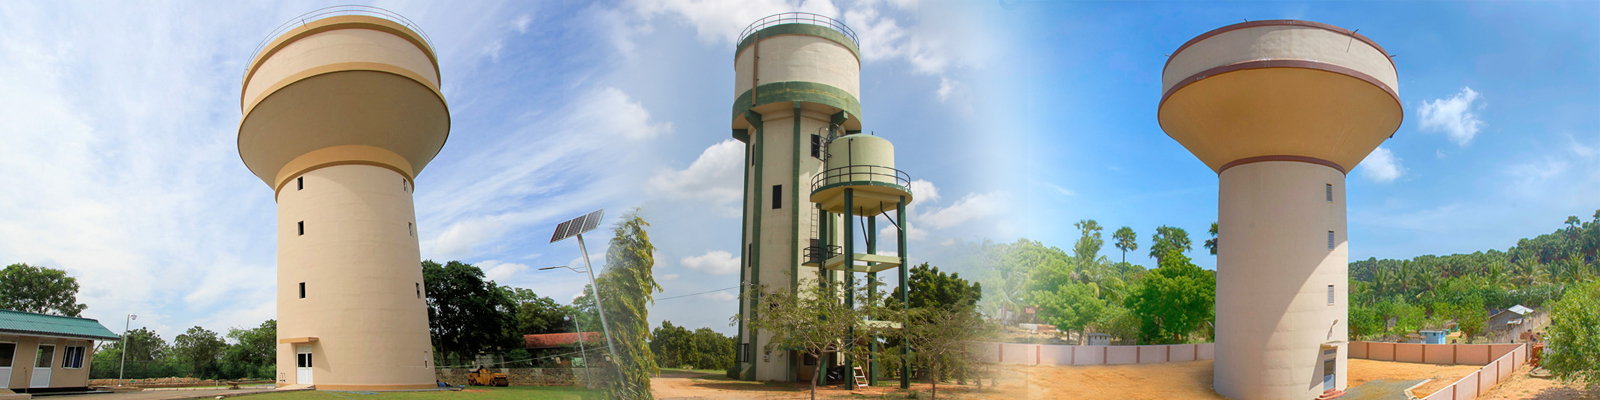 Water Tank Cleaning Service in India  @MaxCleaner